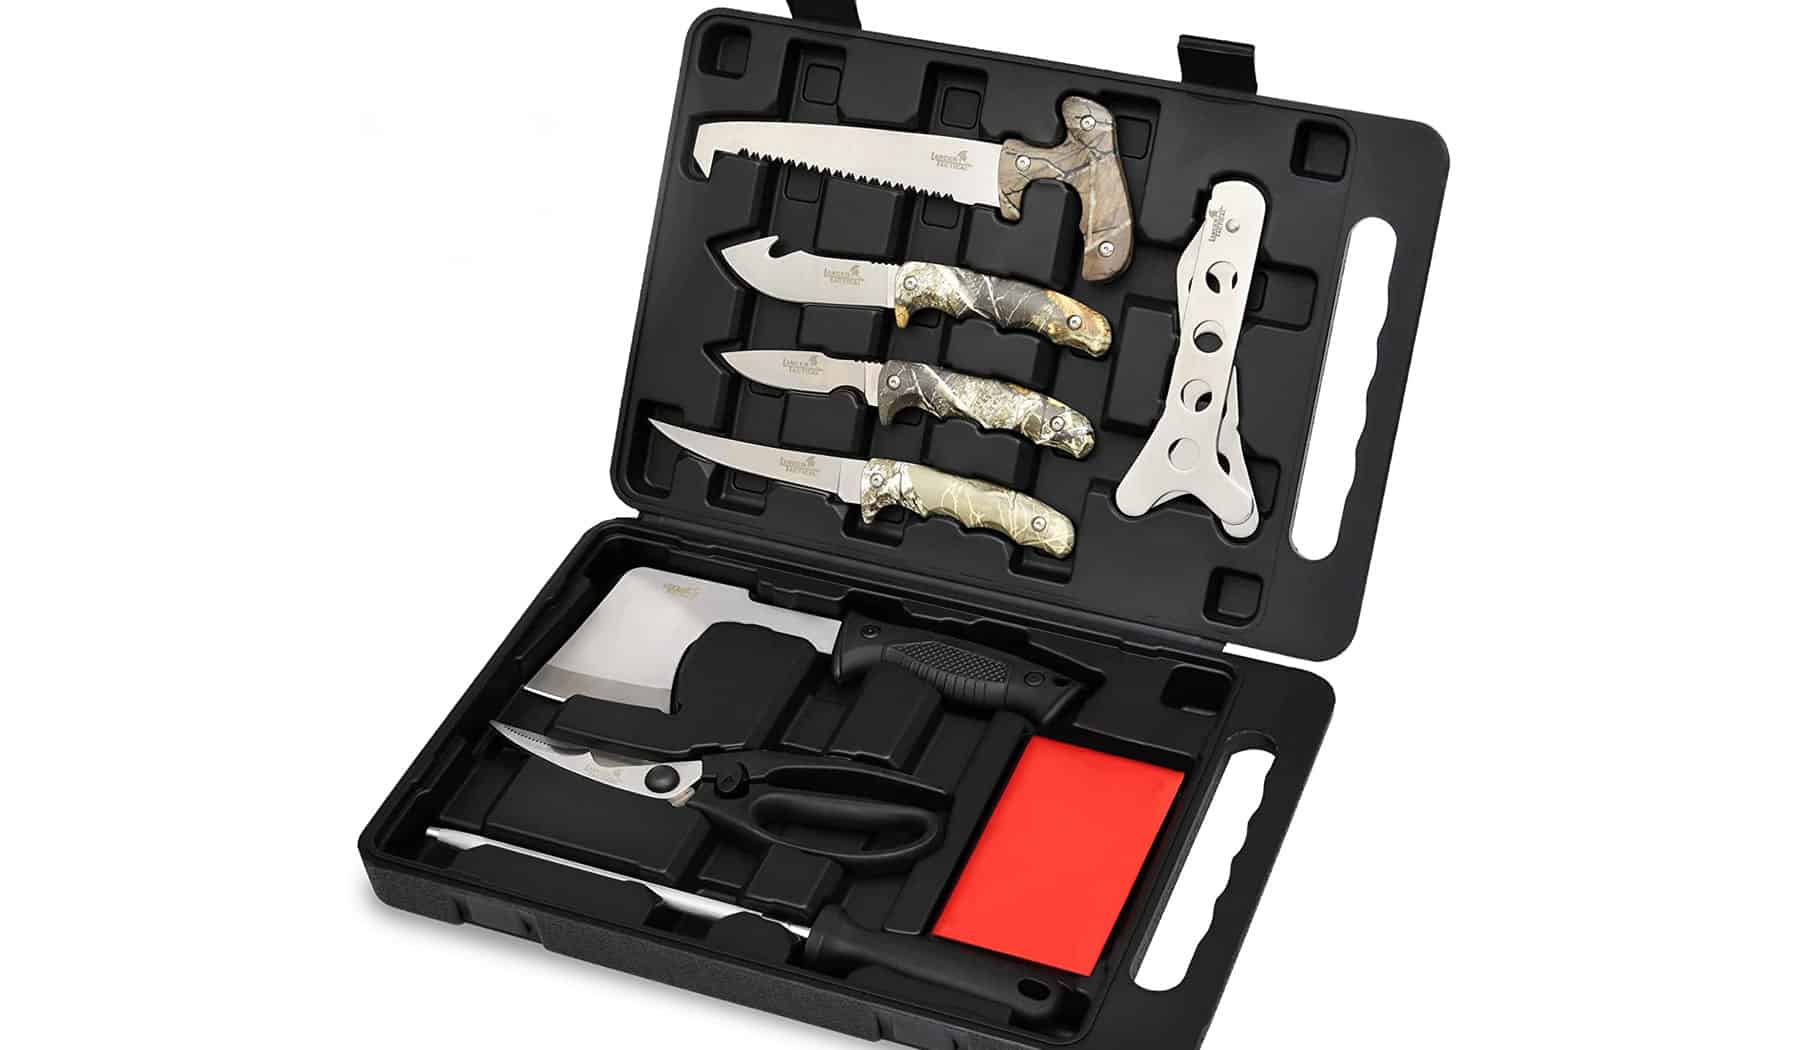 This large field dressing set from Lancergear inludes a lot of knives at a budget price.